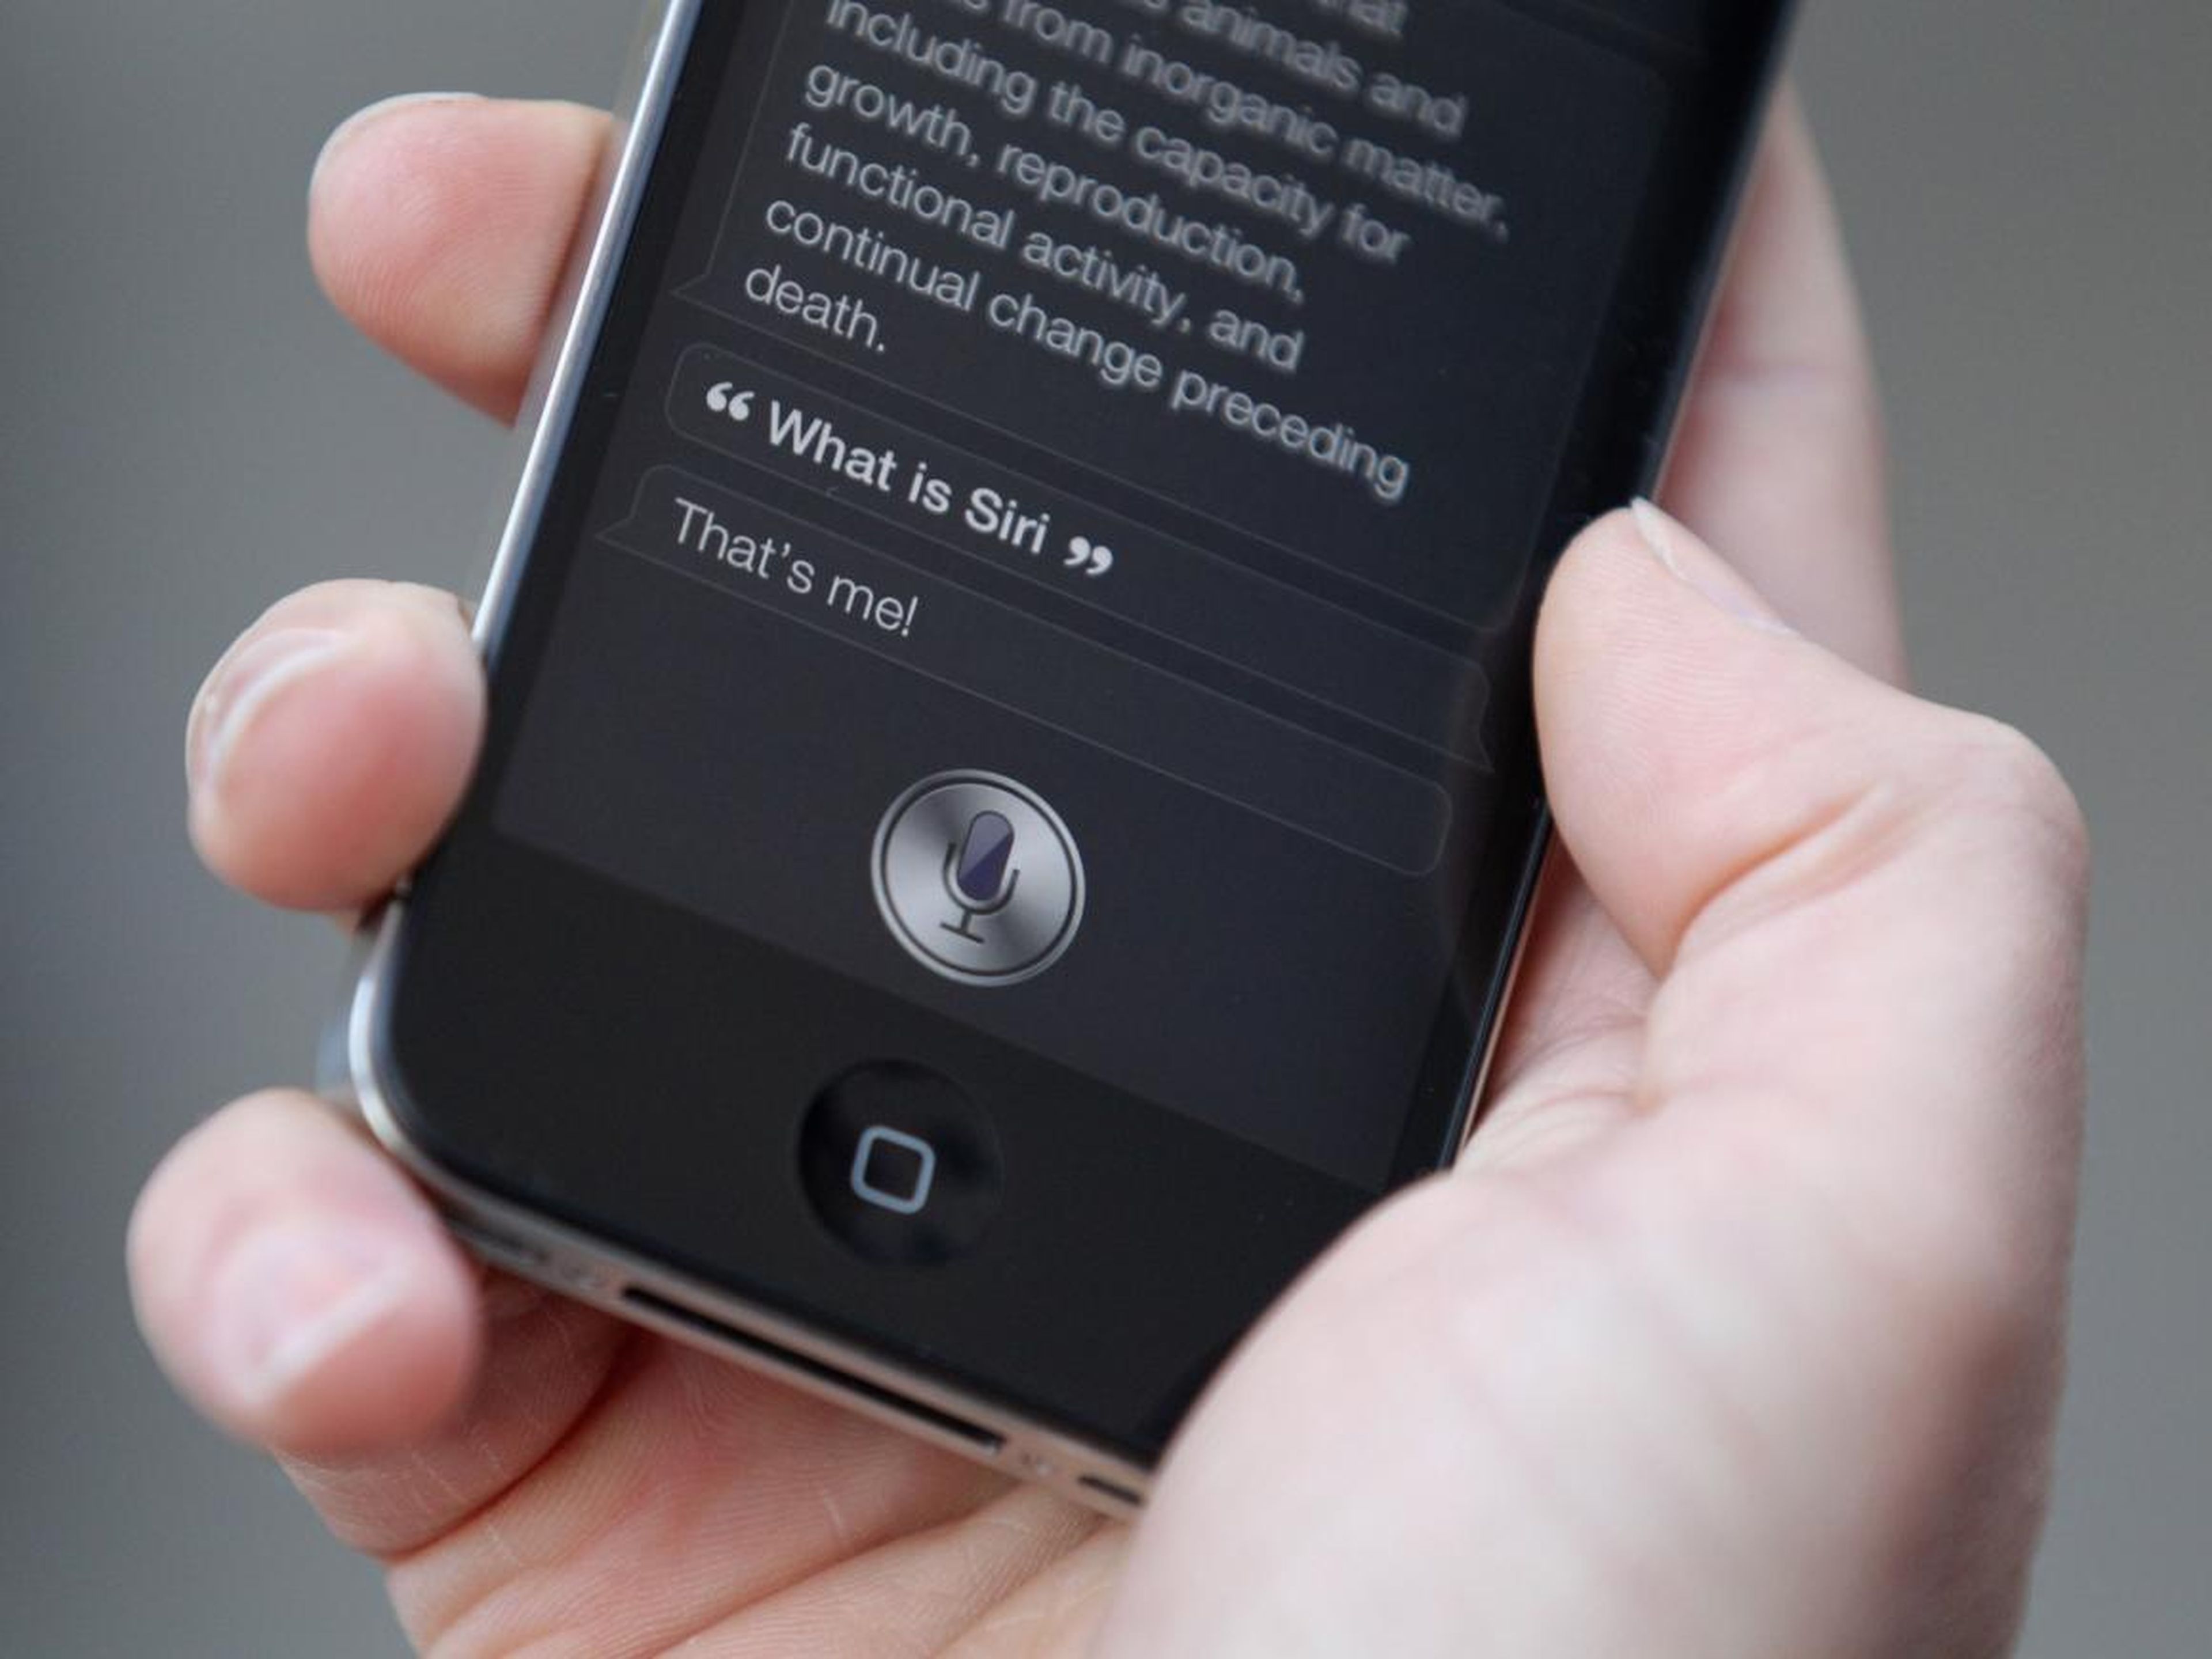 Jobs predicted that we would carry around "slates" with "agents" — basically, iPhones with Siri.